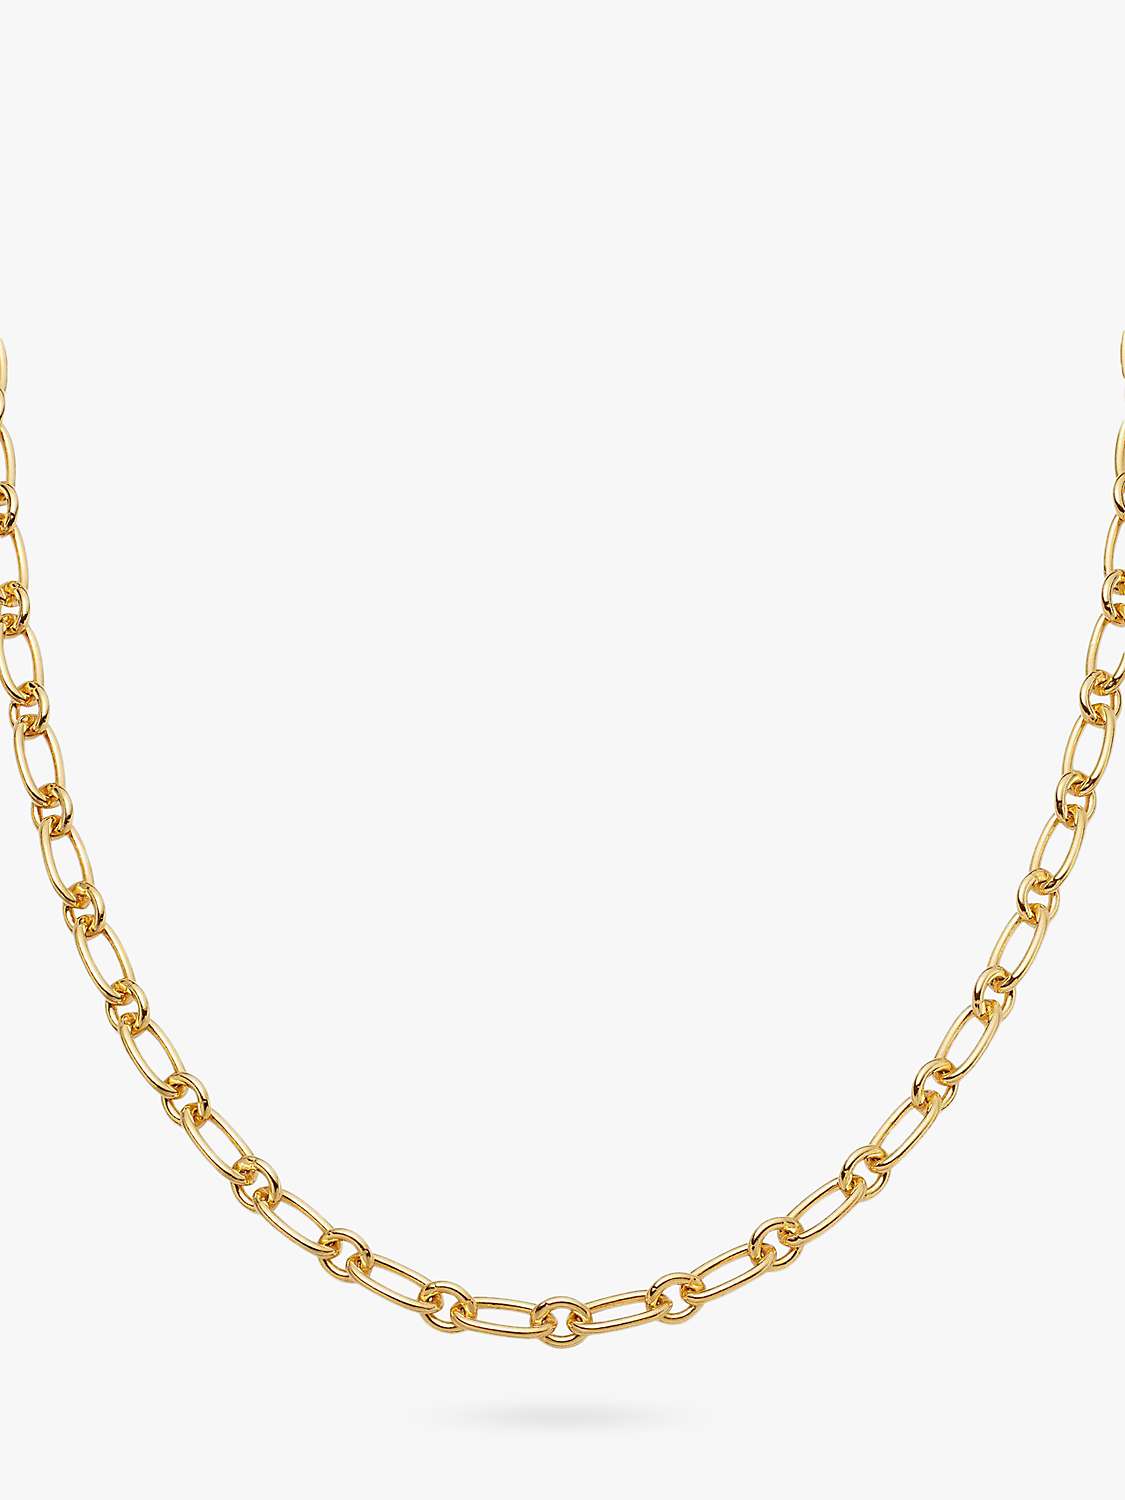 Buy Daisy London Link Chain Necklace, Gold Online at johnlewis.com